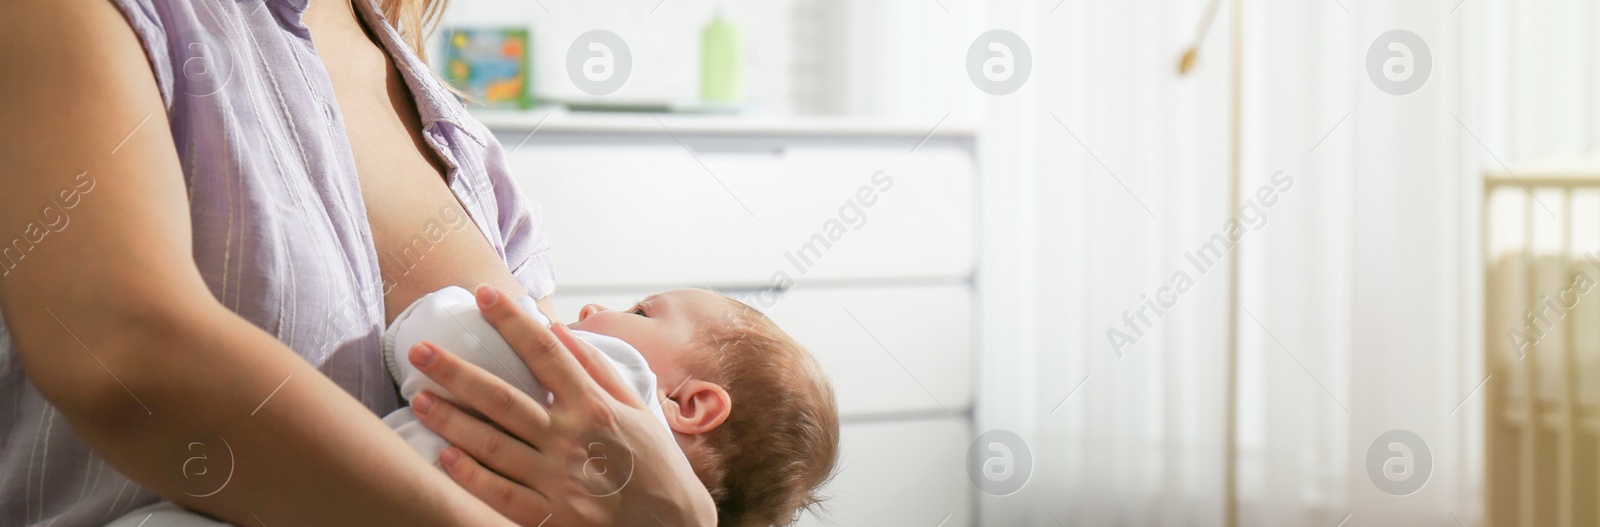 Image of Young woman breast feeding her little baby at home, space for text. Banner design